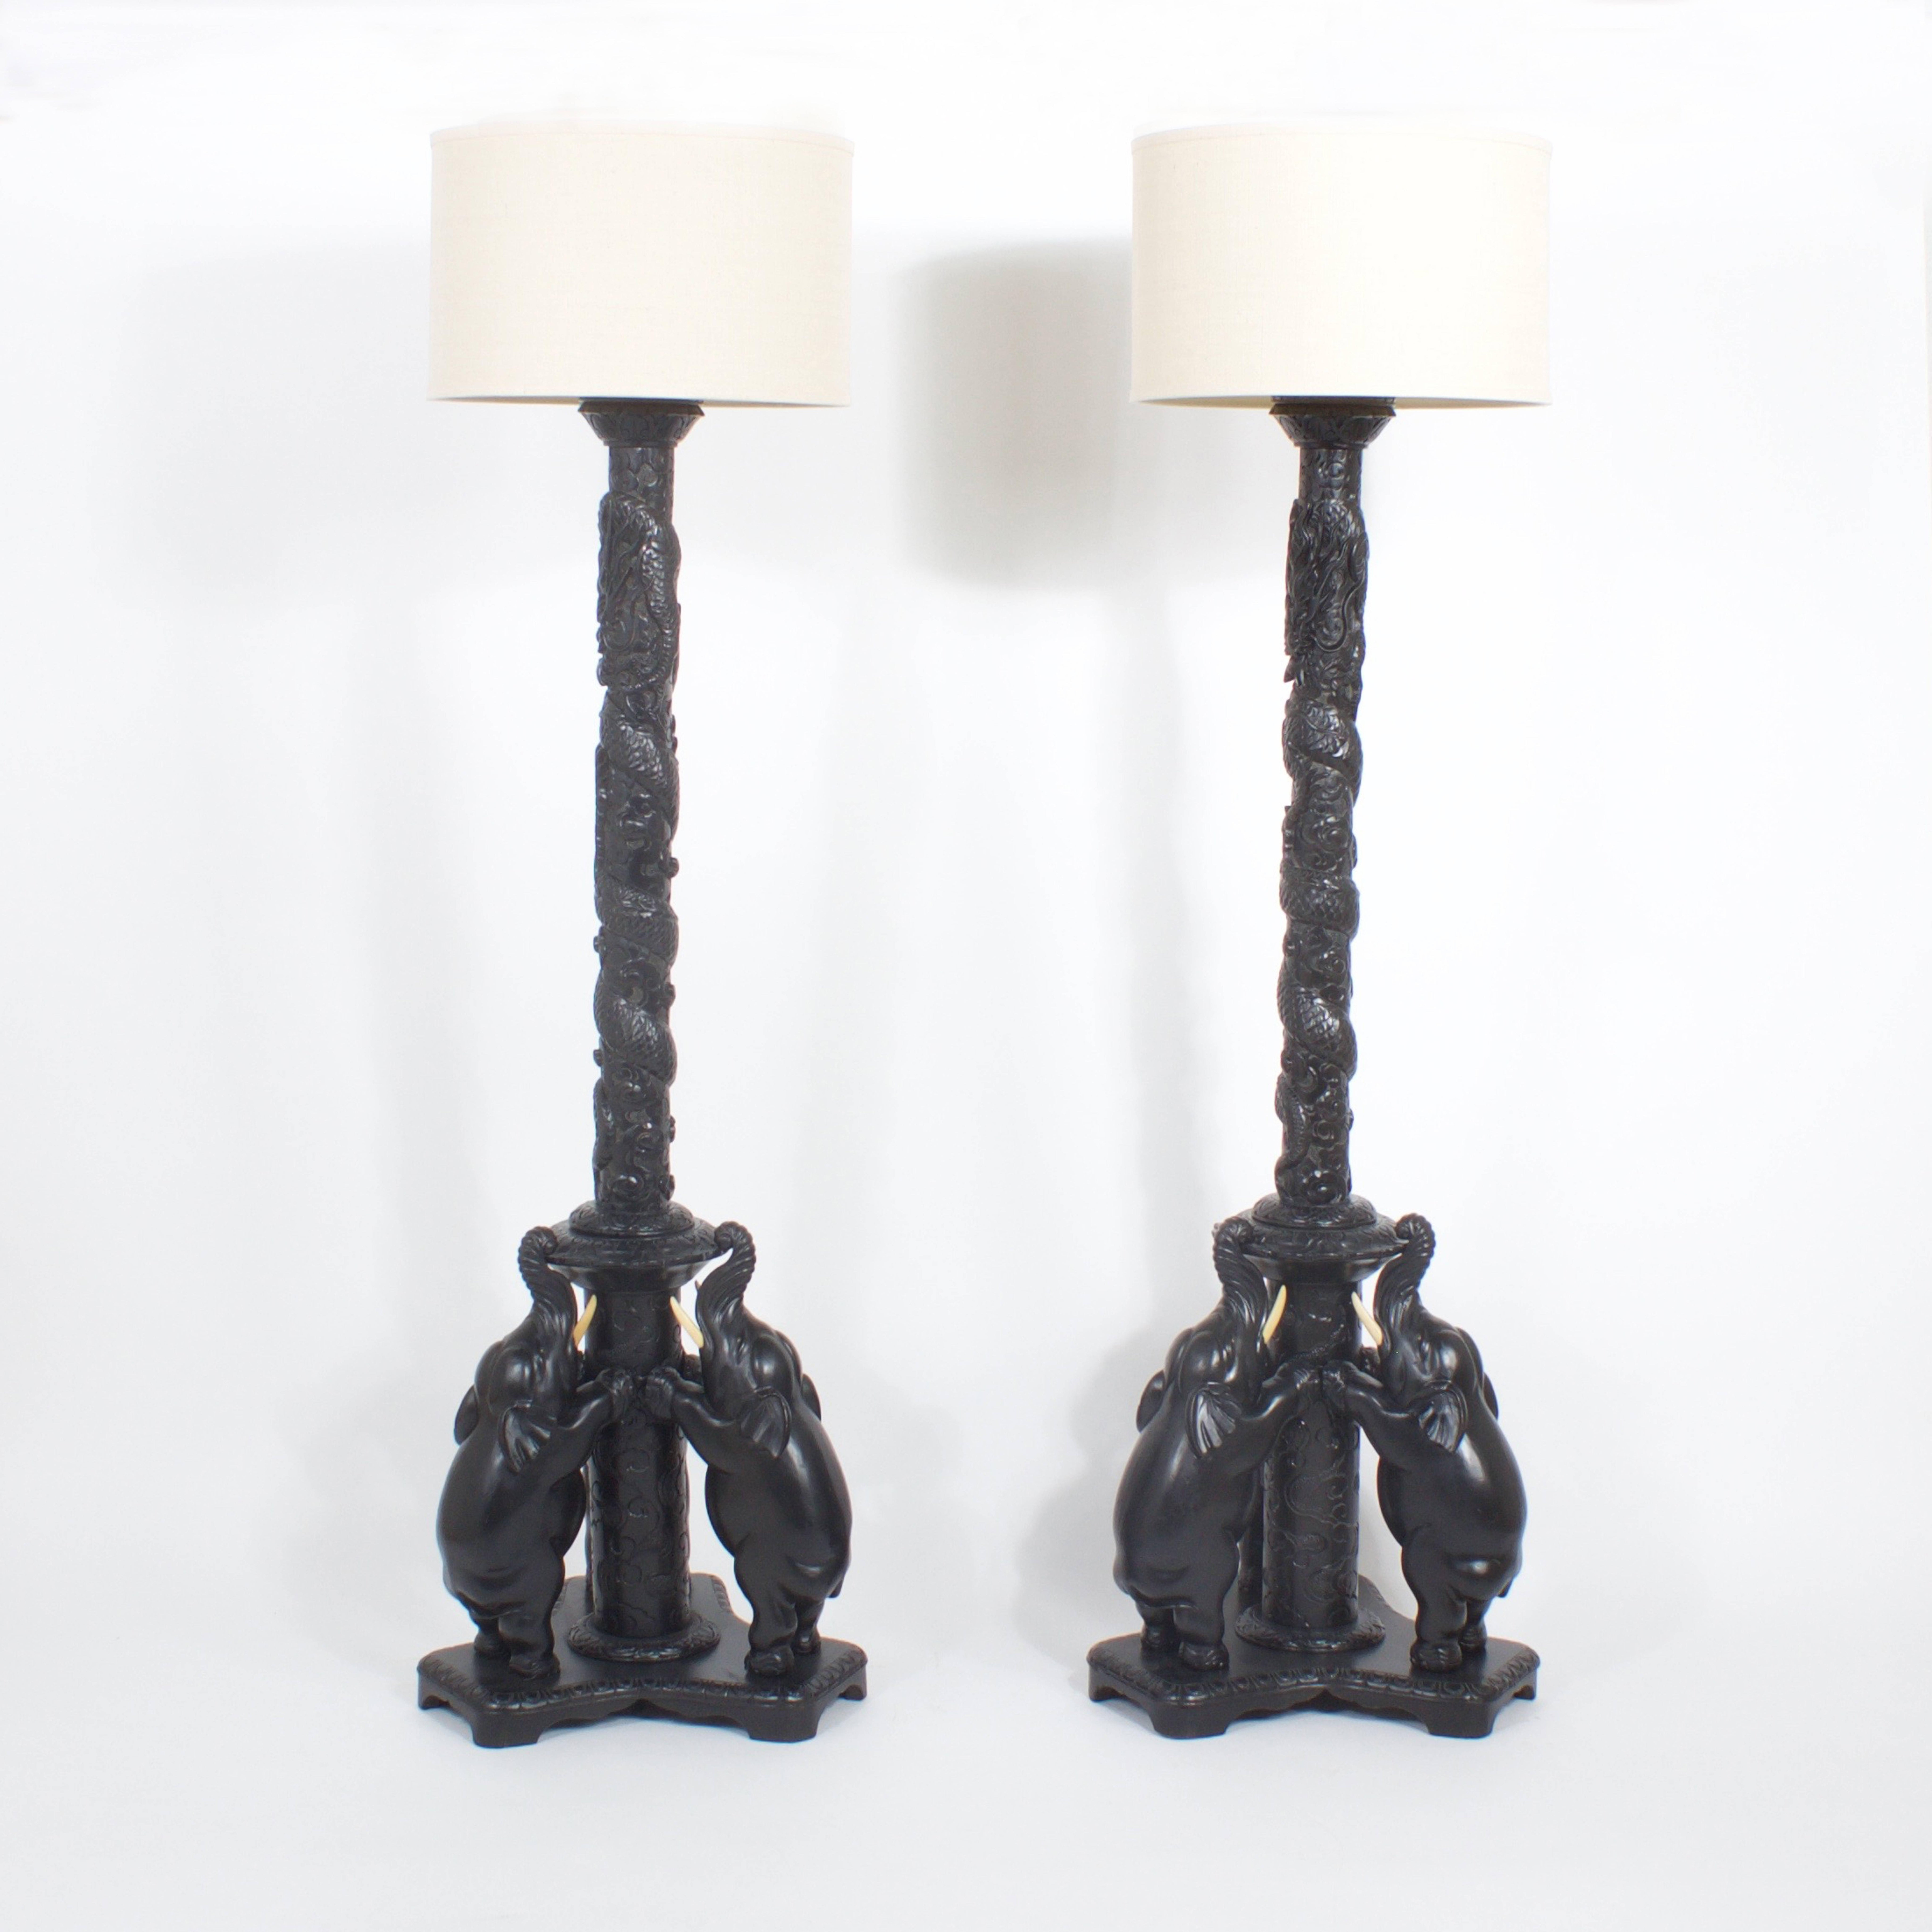 Striking pair of hand-carved hardwood floor lamps with plenty of decorative appeal. They have a carved trunk representing a serpent wrapped around a floral field, supported by three carved elephants with bone carved tusks. These fascinating floor